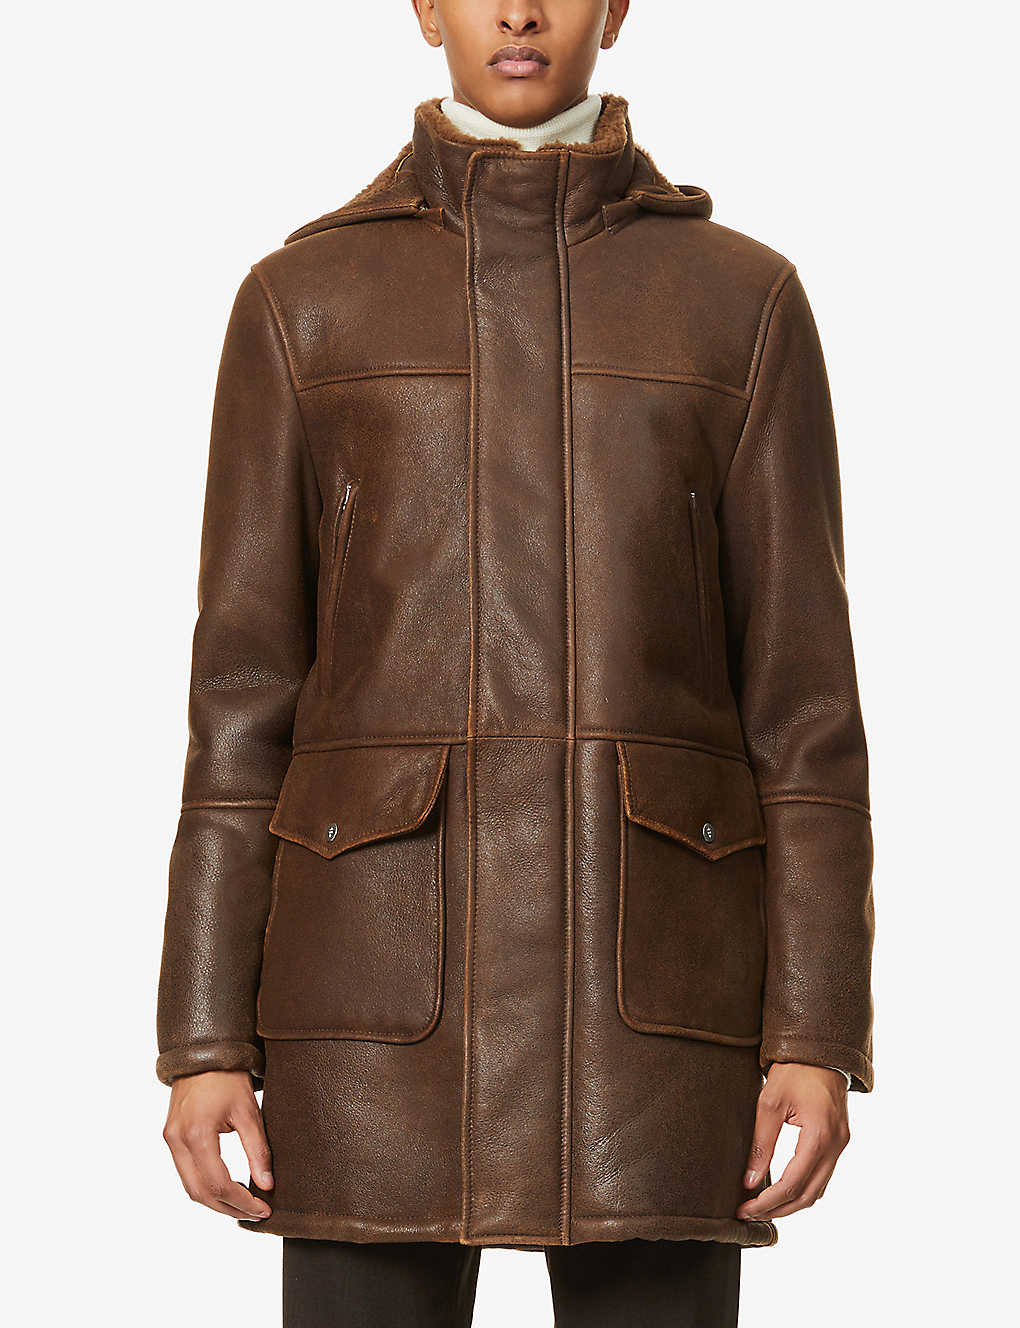 Men's Removable Hooded Brown Leather Shearling Trench Coat